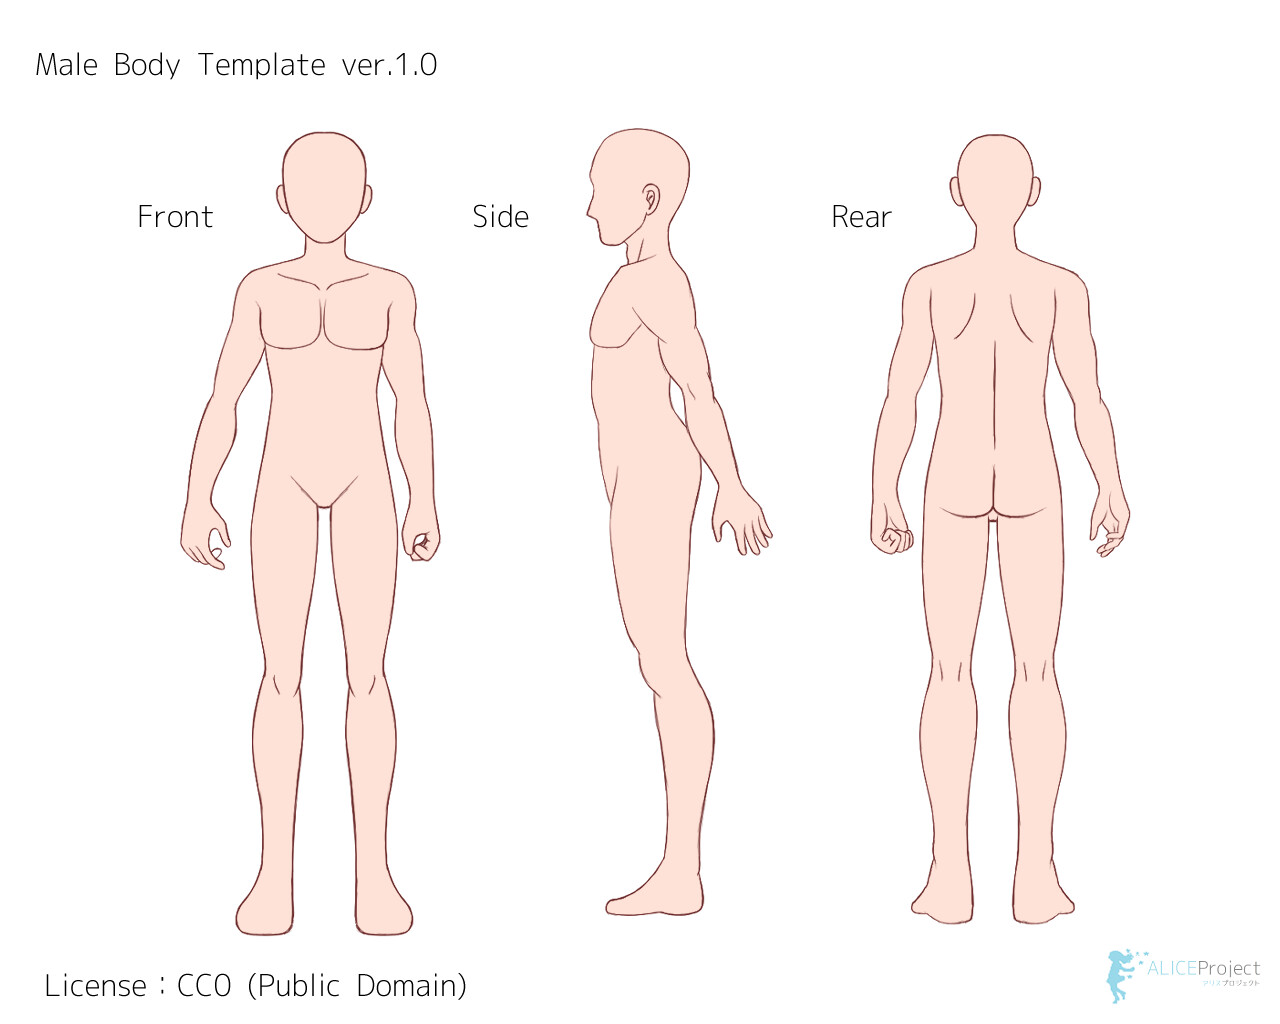 Differences between men and womens bodies in anime  Anime Art Magazine